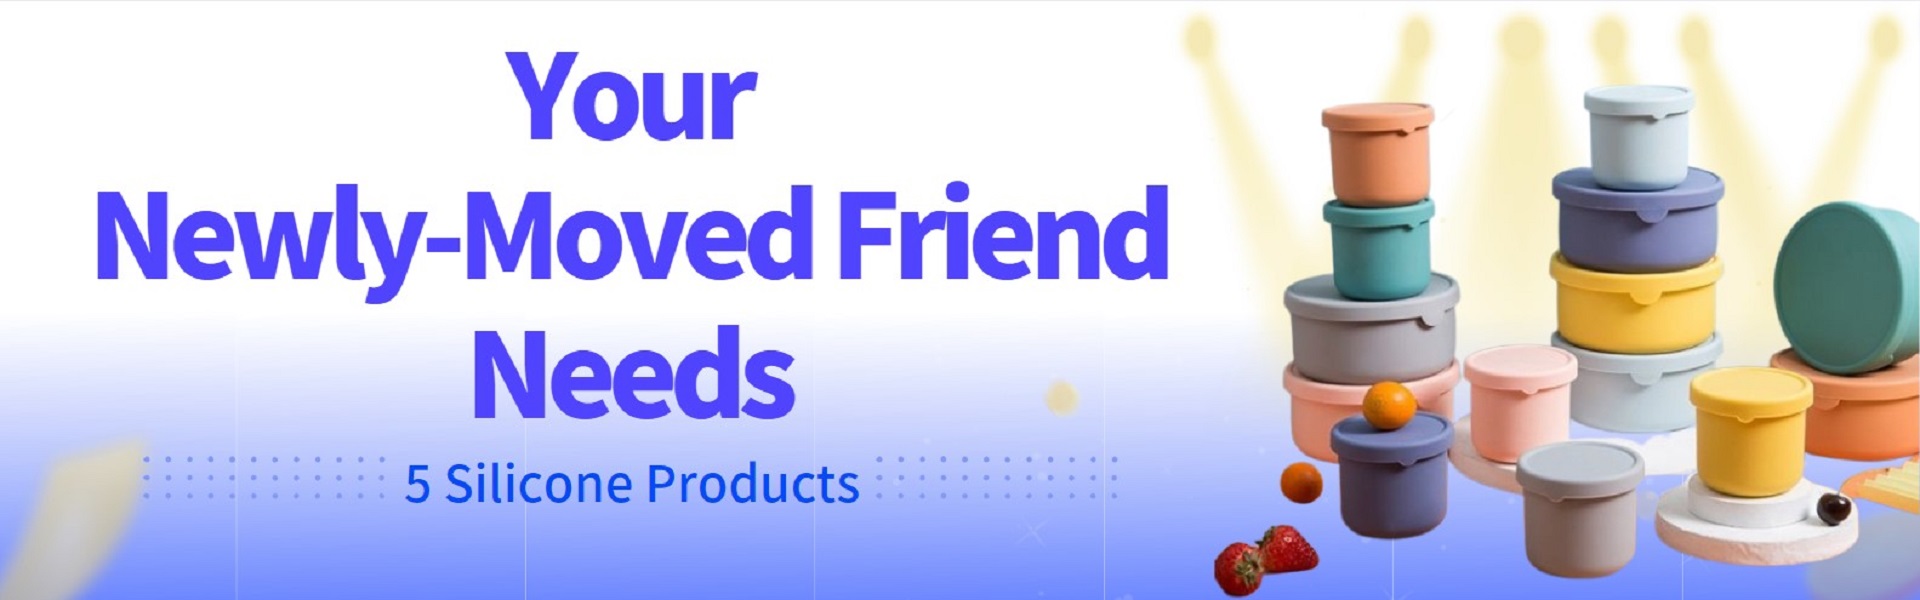 5 Silicone Products Your Newly-Moved Friend Needs